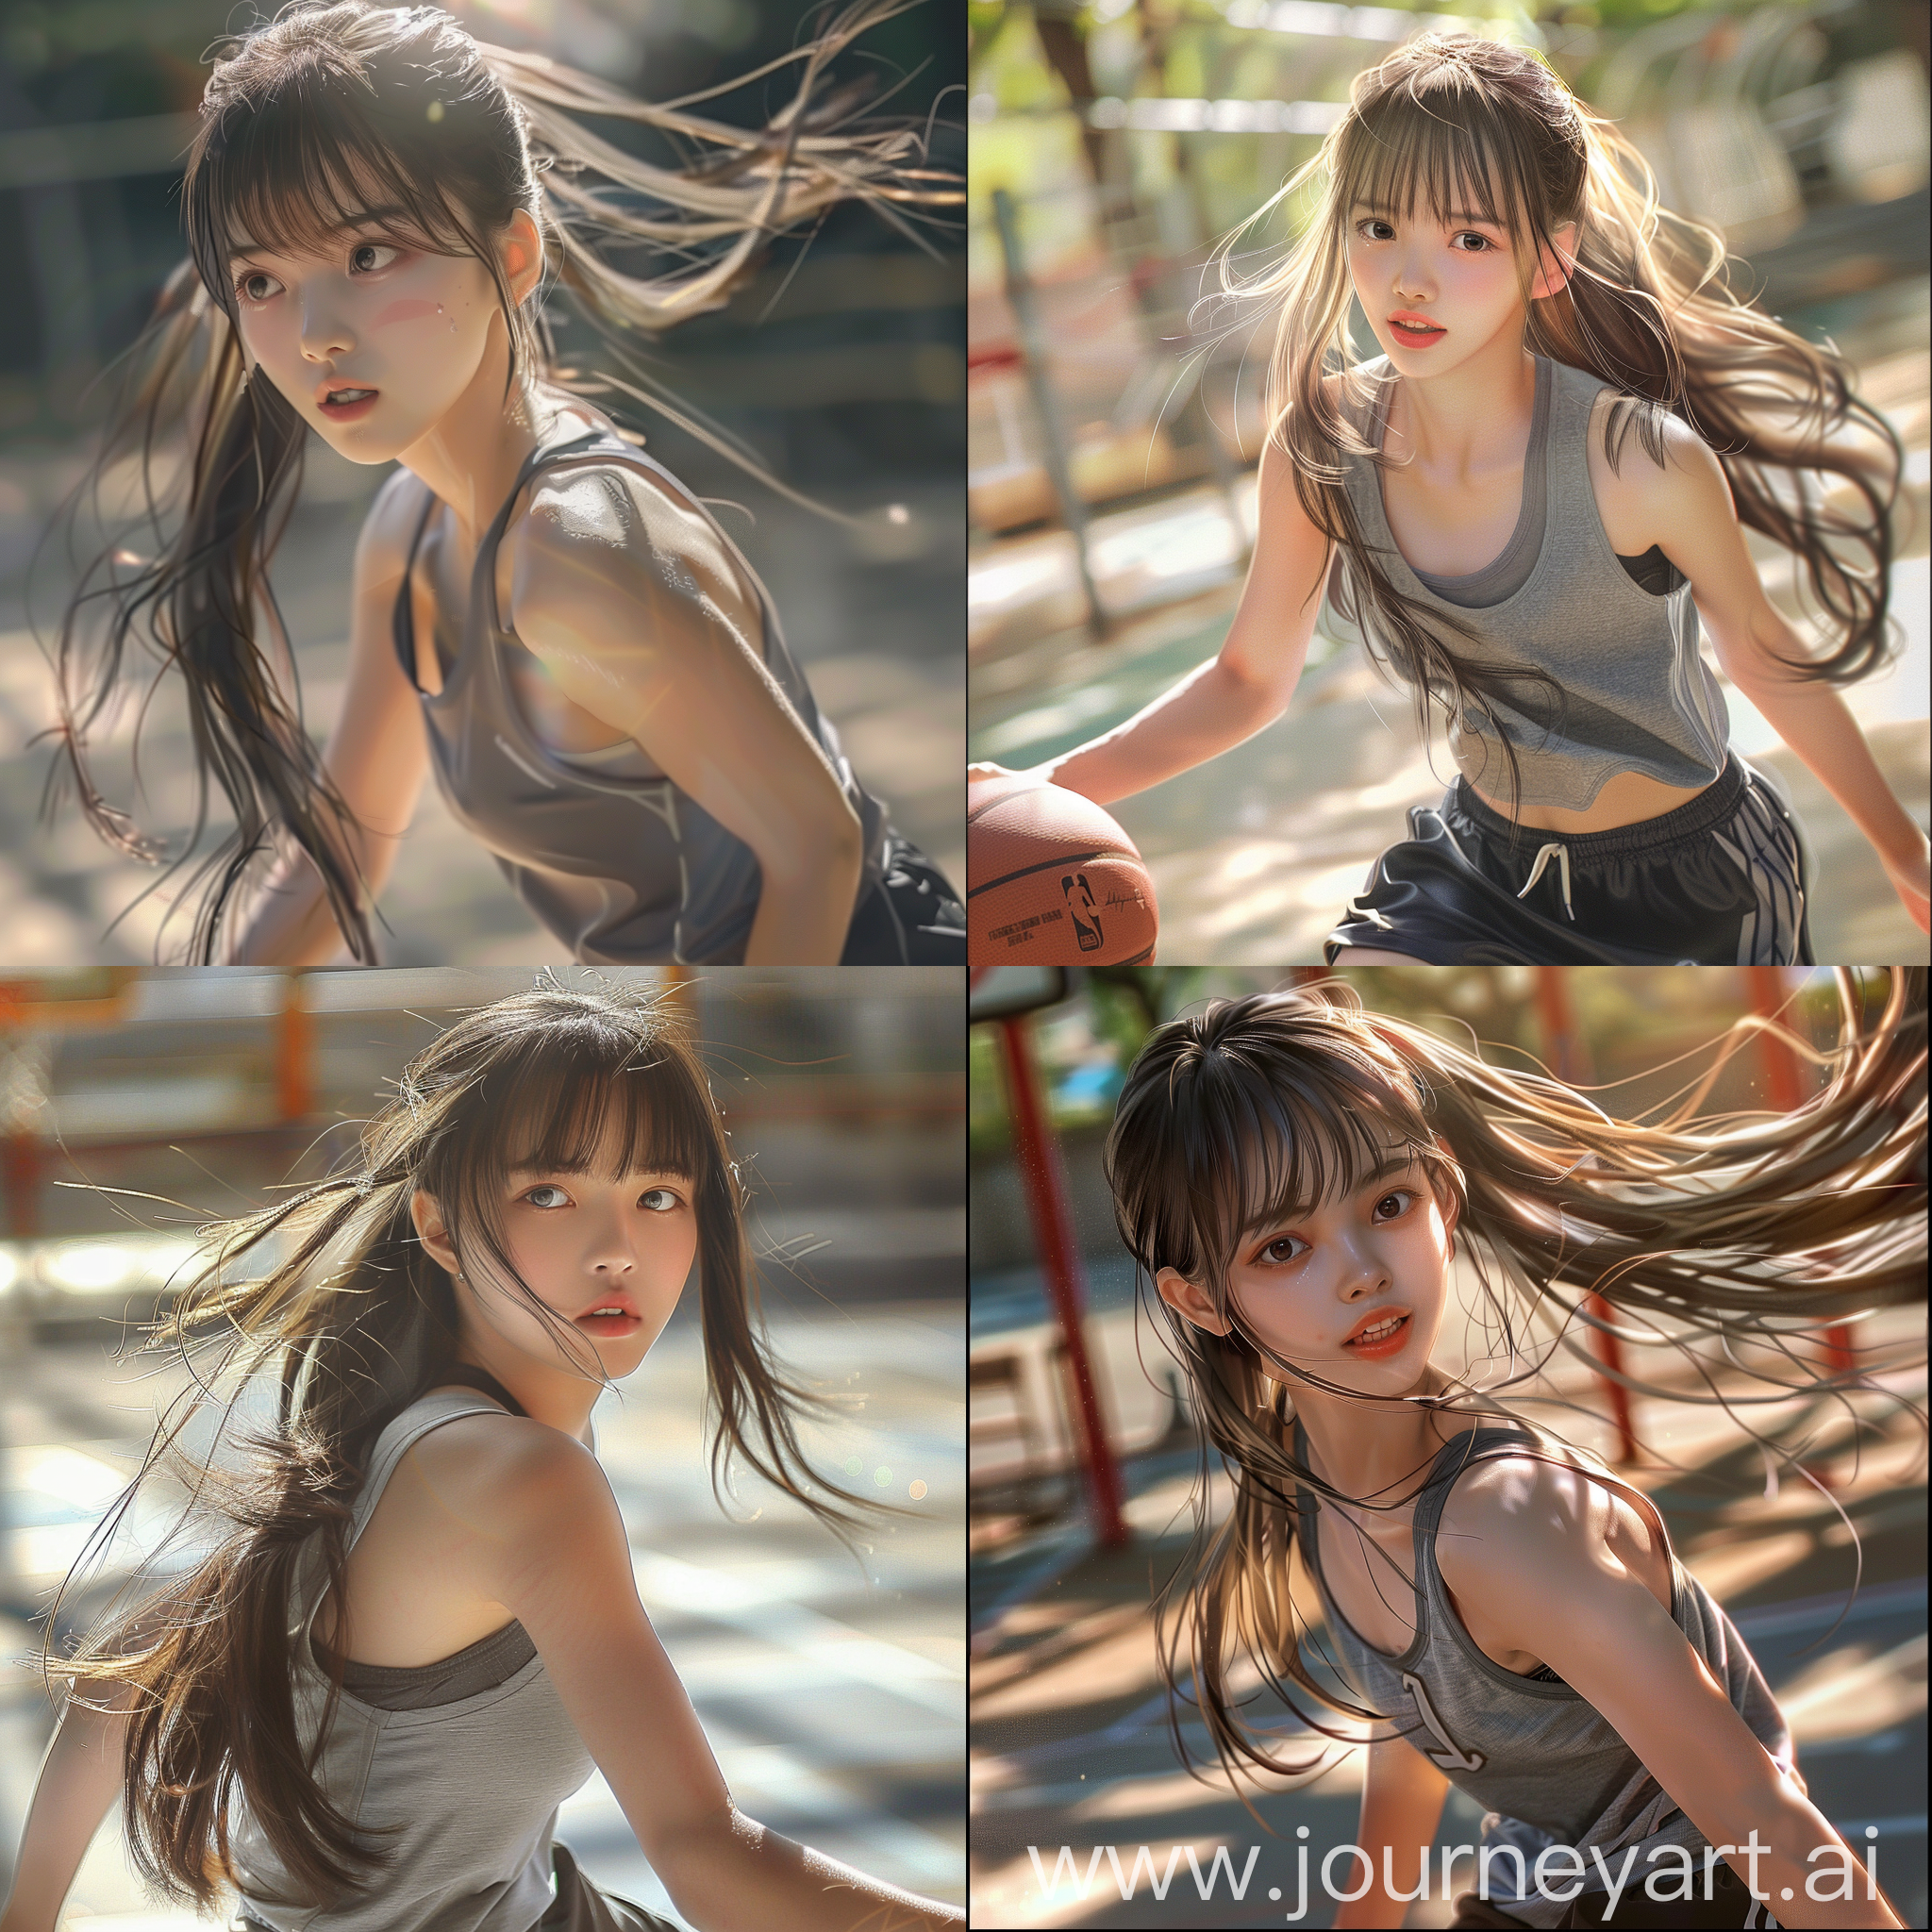  A beautiful Chinese girl with long hair, bangs and a side parting hairstyle is playing basketball on the playground. She has exquisite facial features and delicate skin texture, wearing a gray tank top and black sports shorts. The sunlight shines through her hair onto her face, creating soft shadows. She is playing basketball in the style of a Chinese artist.